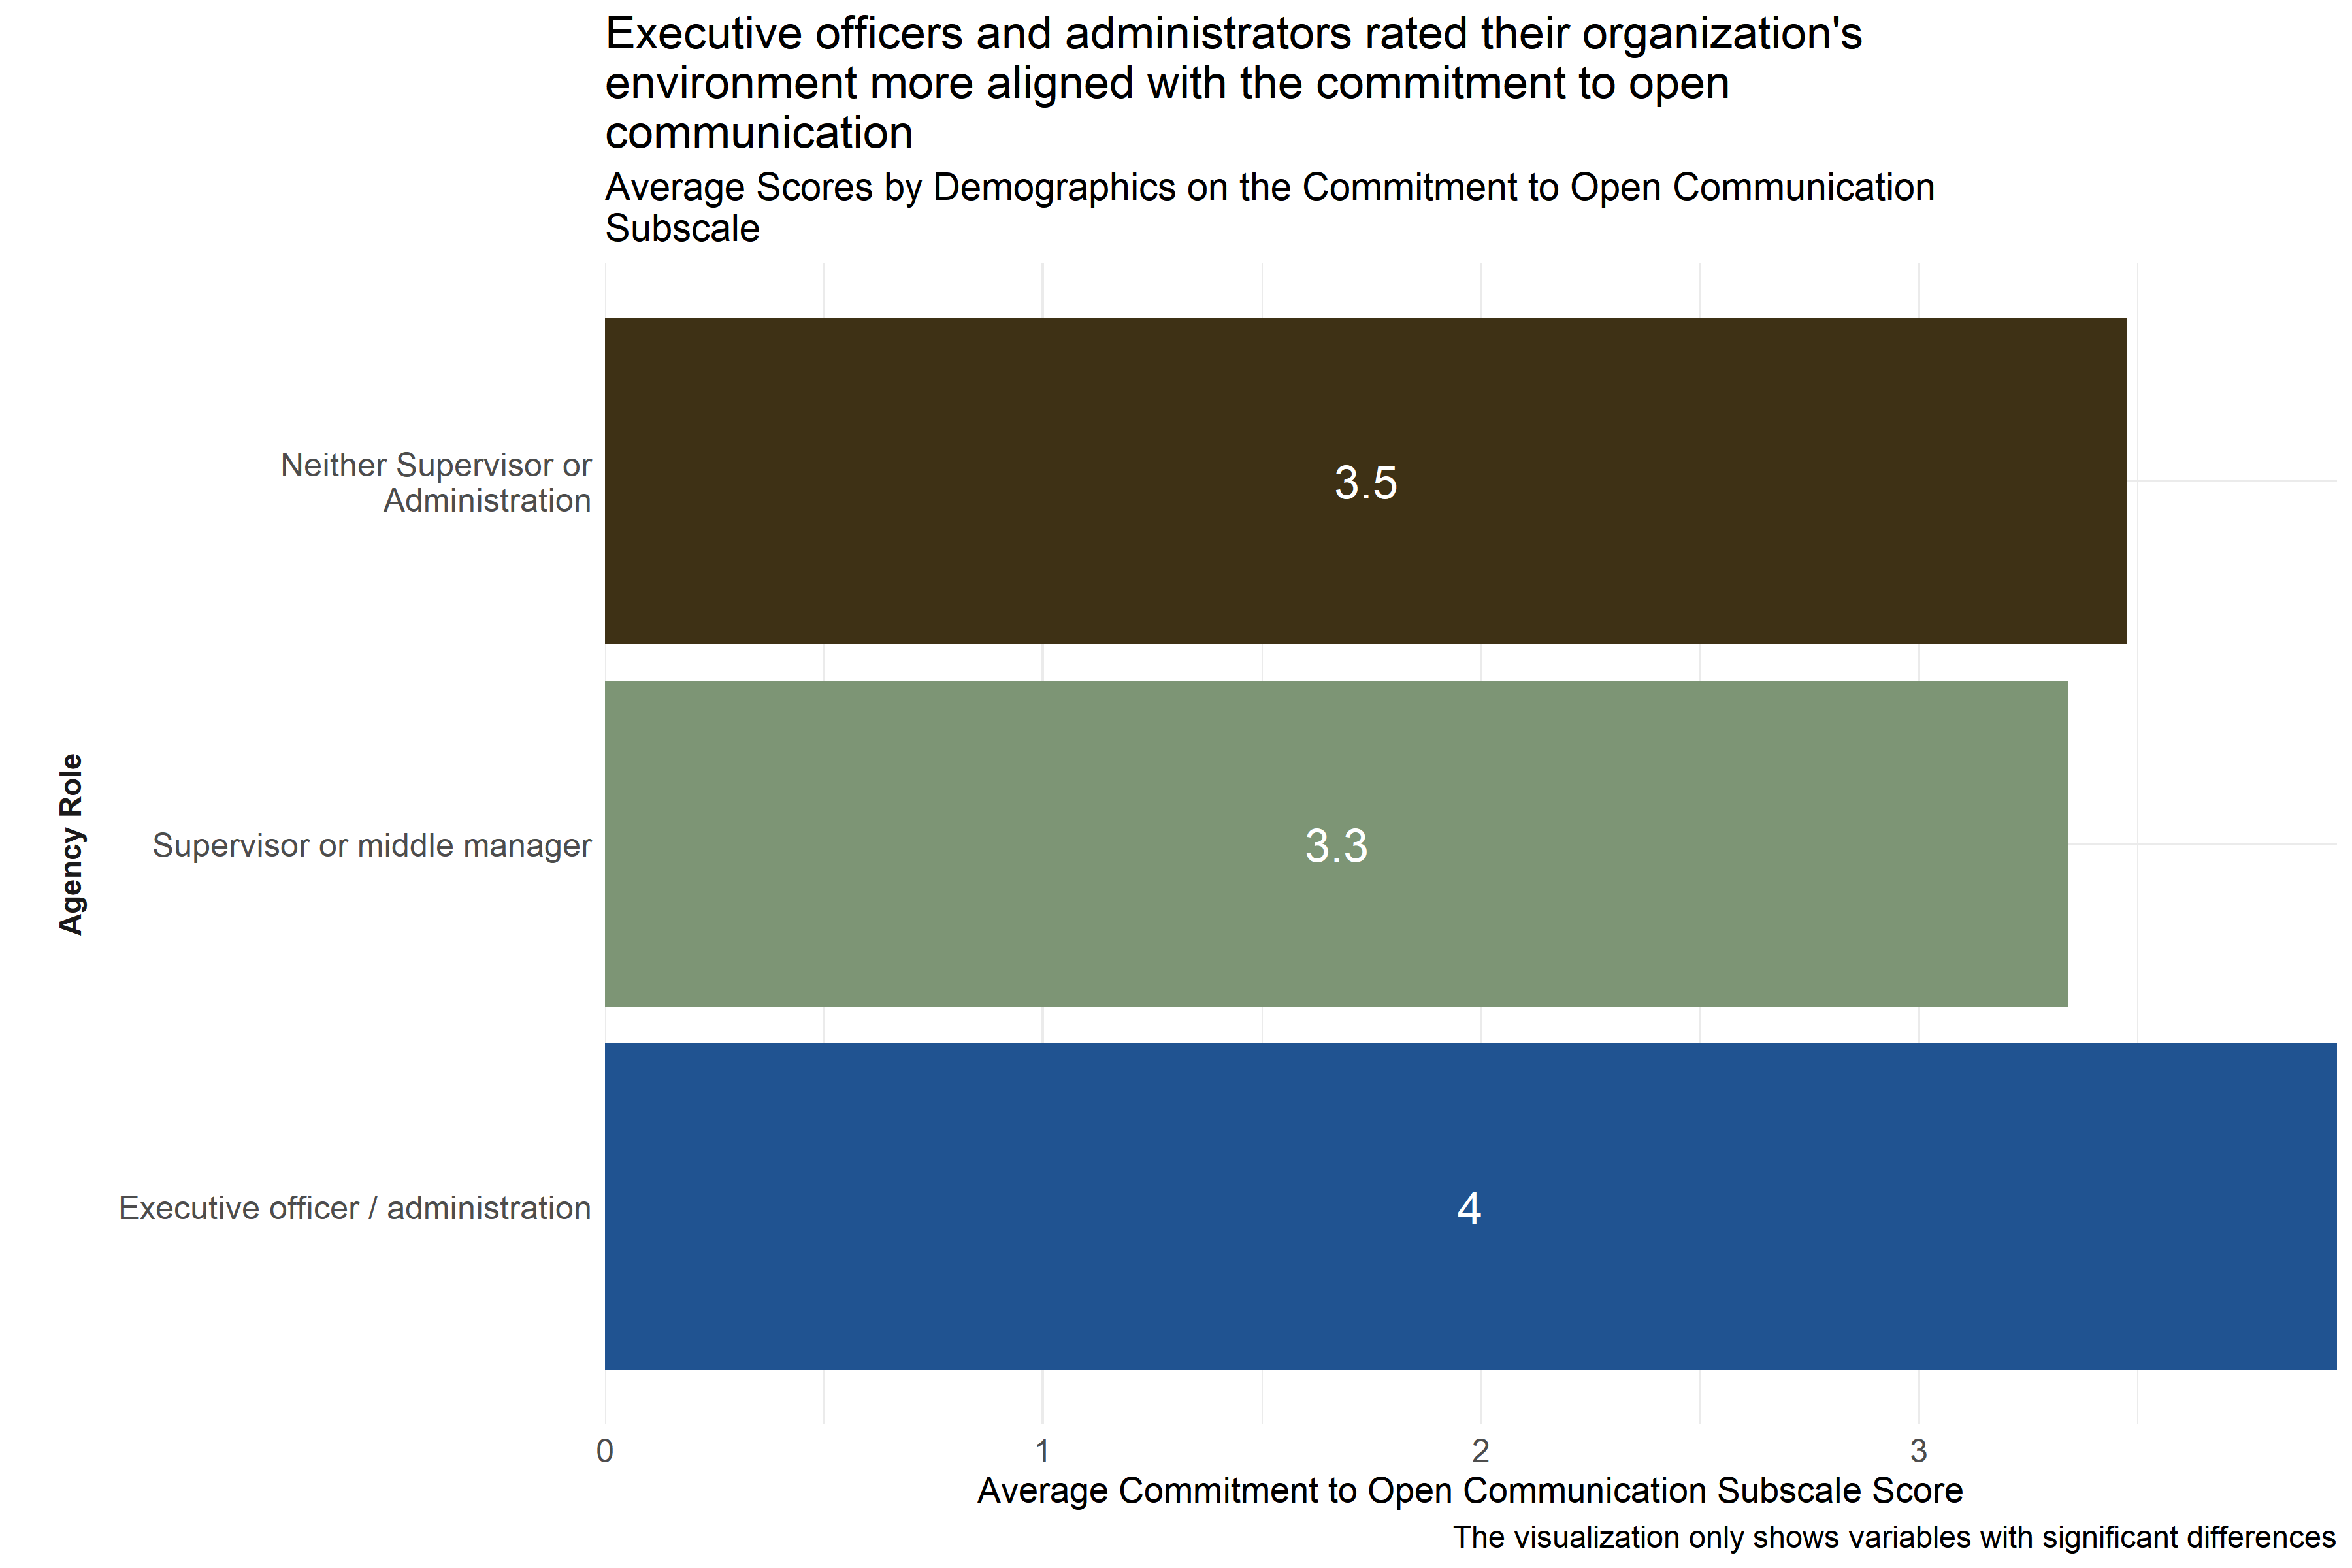 Average scores for Commitment to Open Communication
Subscale across demographic groups